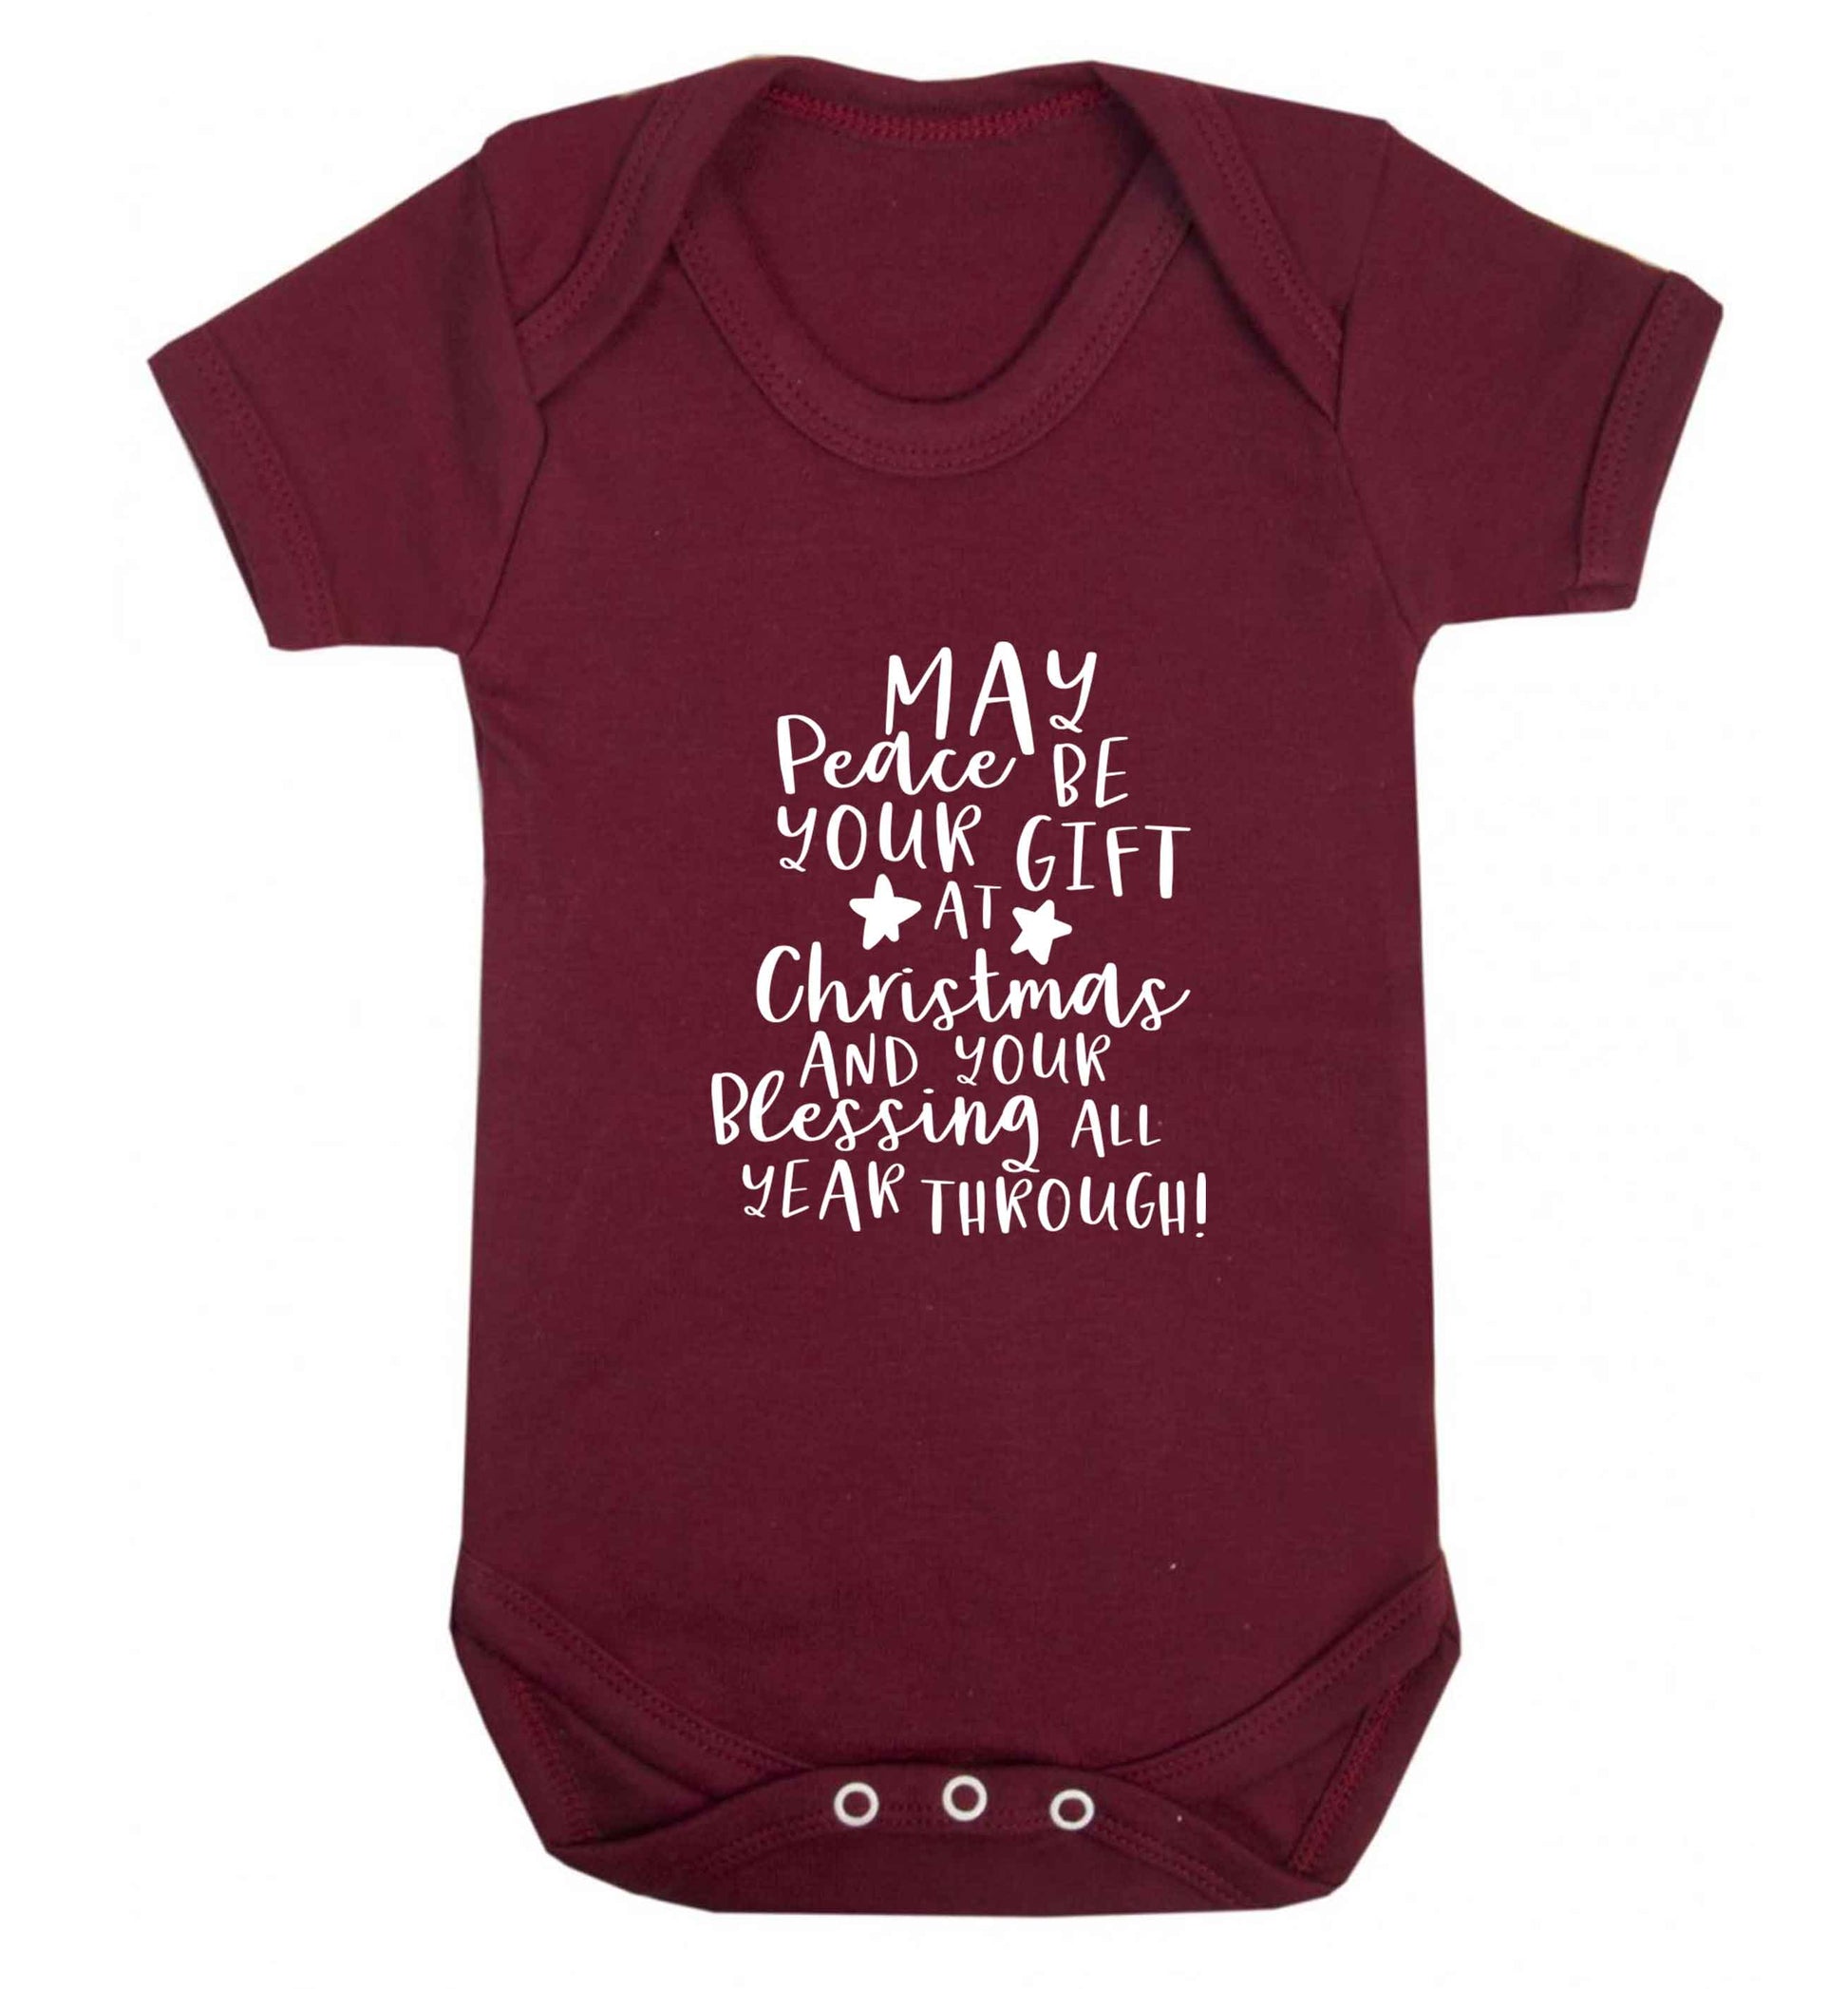 Peace be your Gift at Christmas Gift baby vest maroon 18-24 months